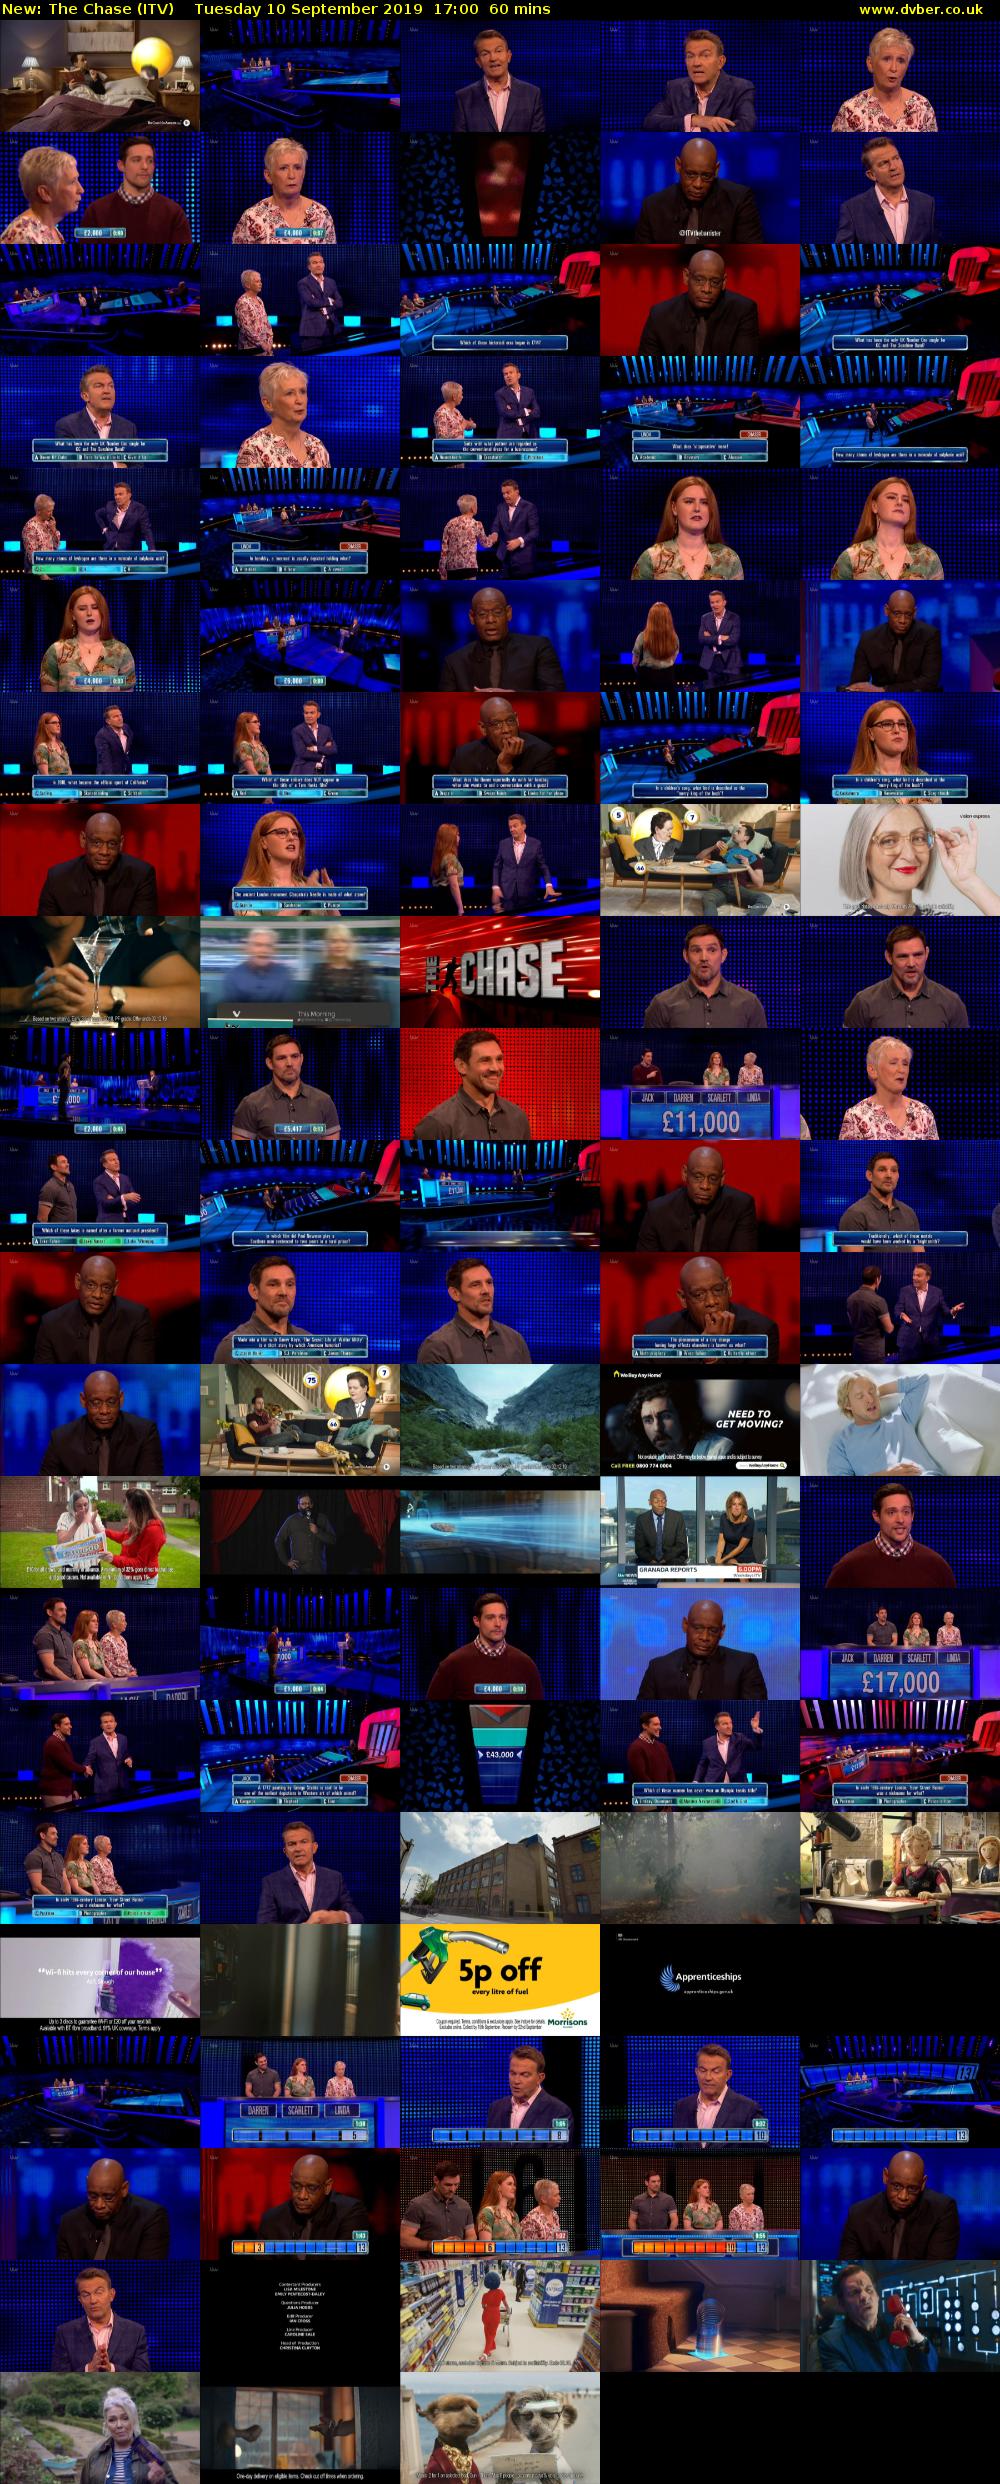 The Chase (ITV) Tuesday 10 September 2019 17:00 - 18:00